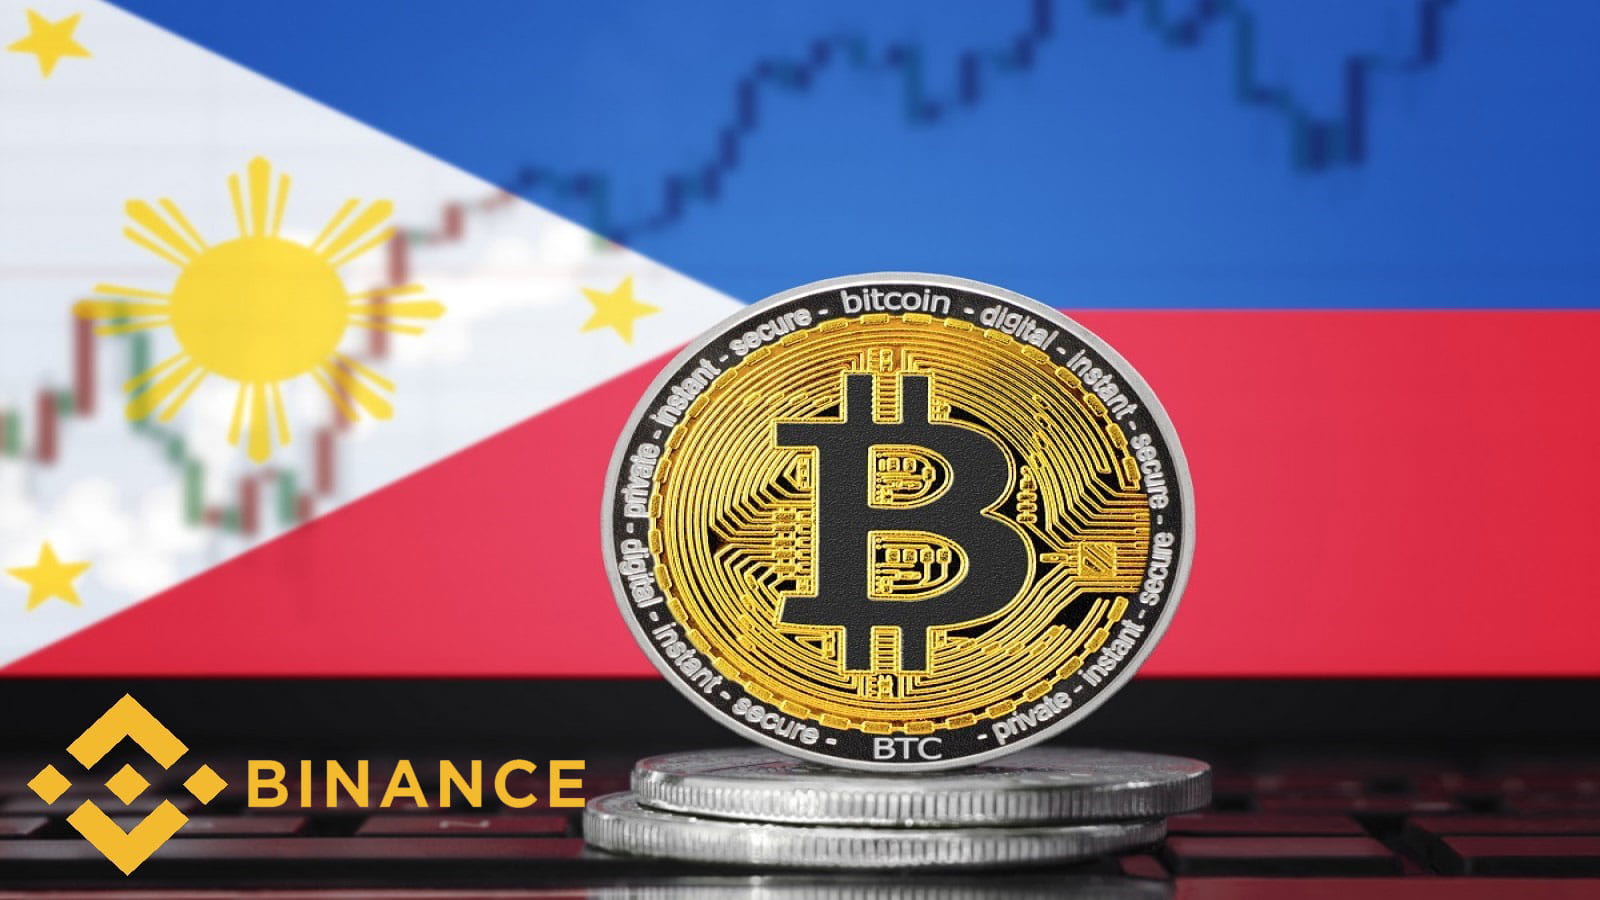 Binance optimistic about market expansion in the Philippines